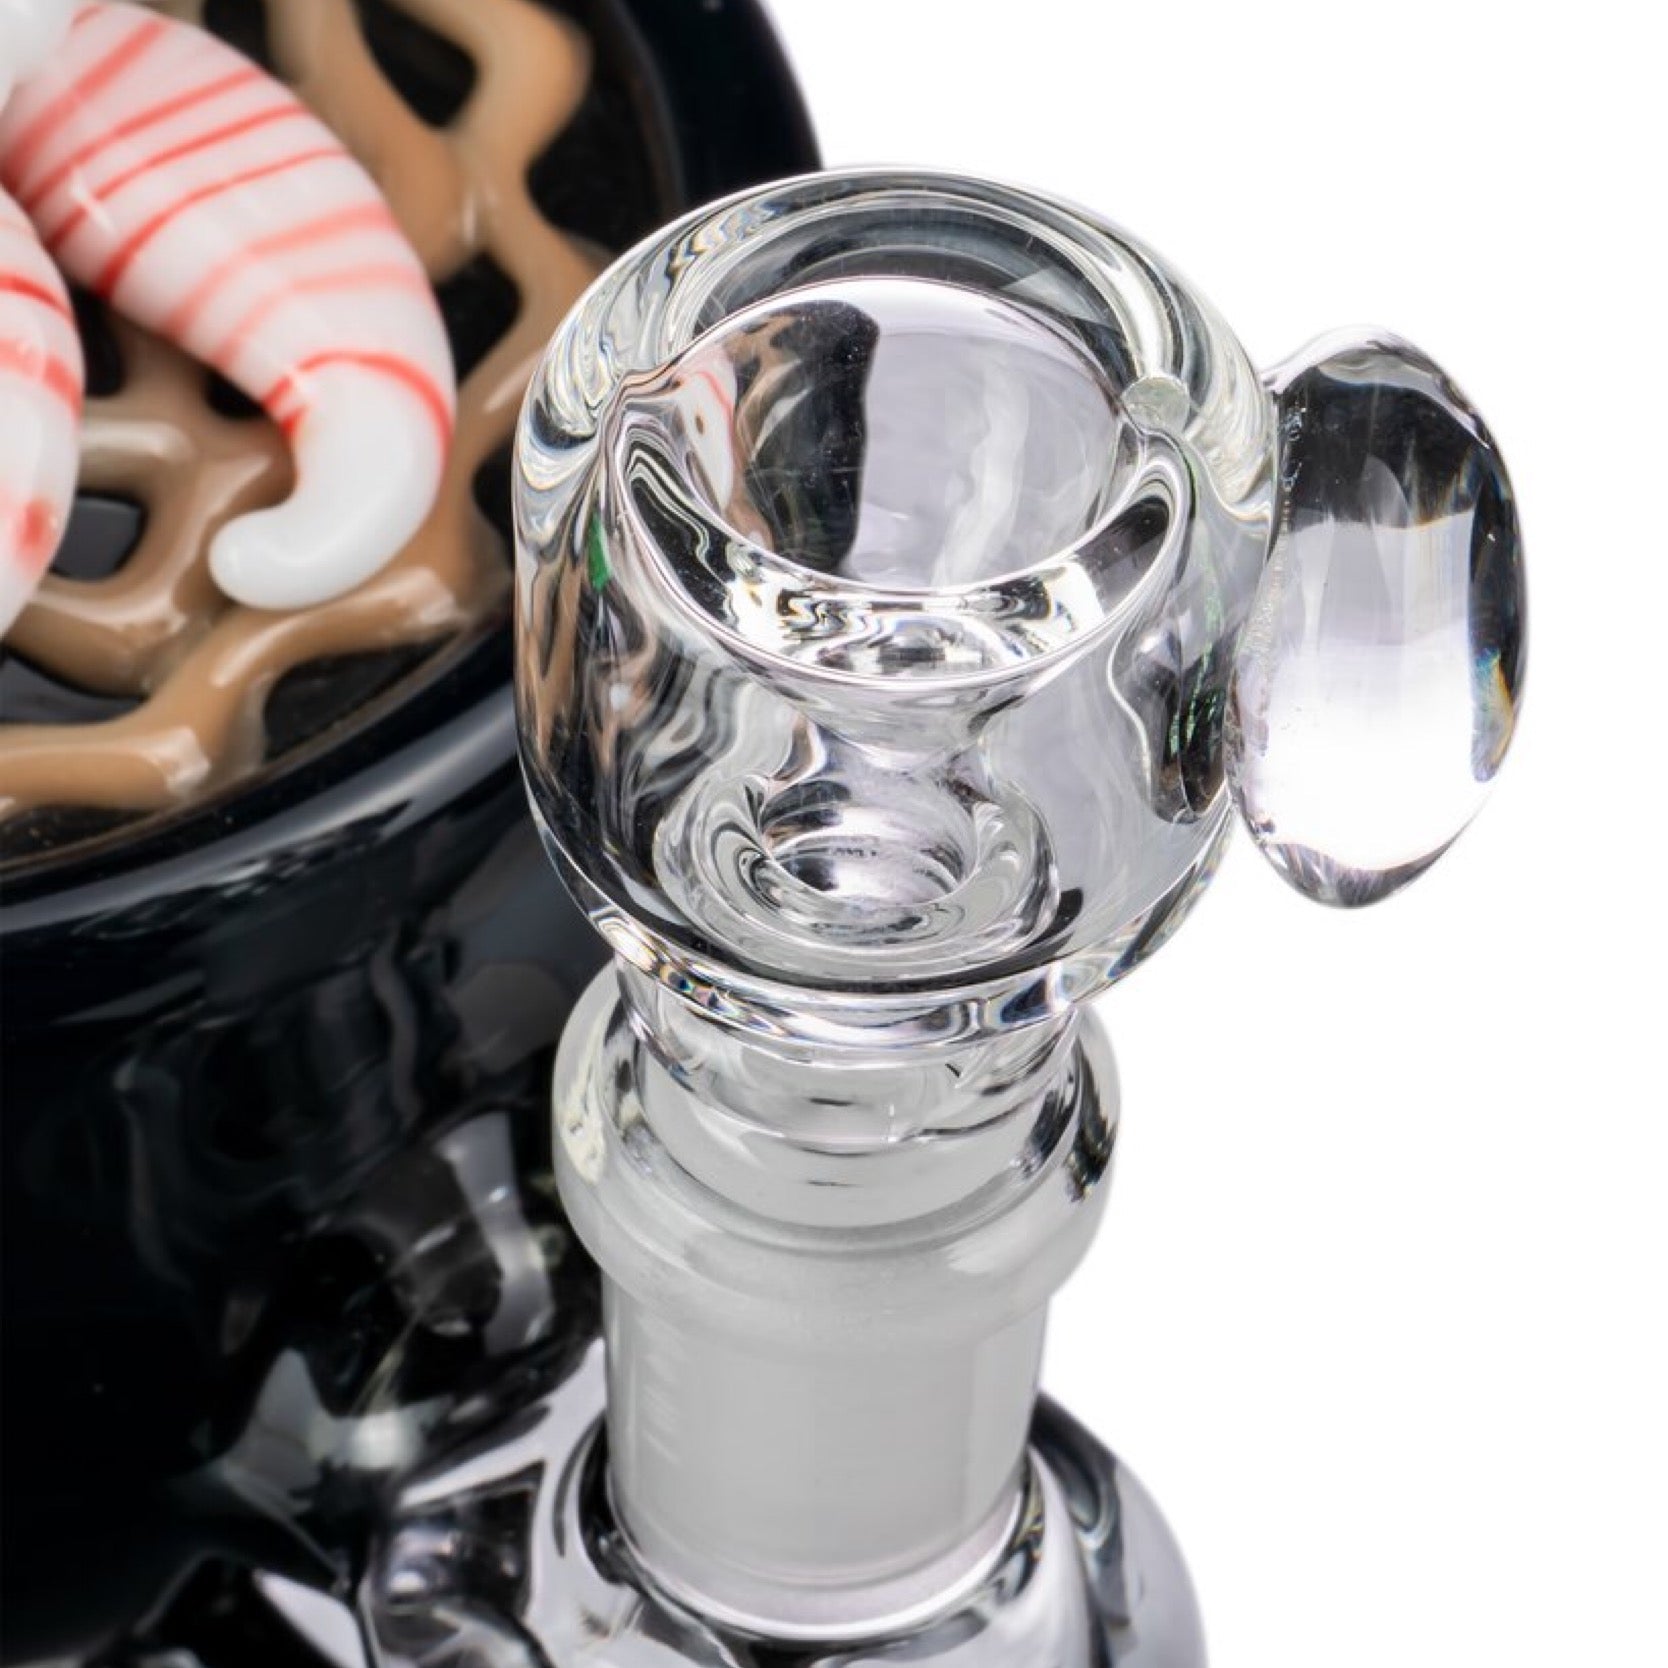 Empire Glassworks “Bowl of Noods” Mini Bong 🍜 by Empire Glassworks | Mission Dispensary